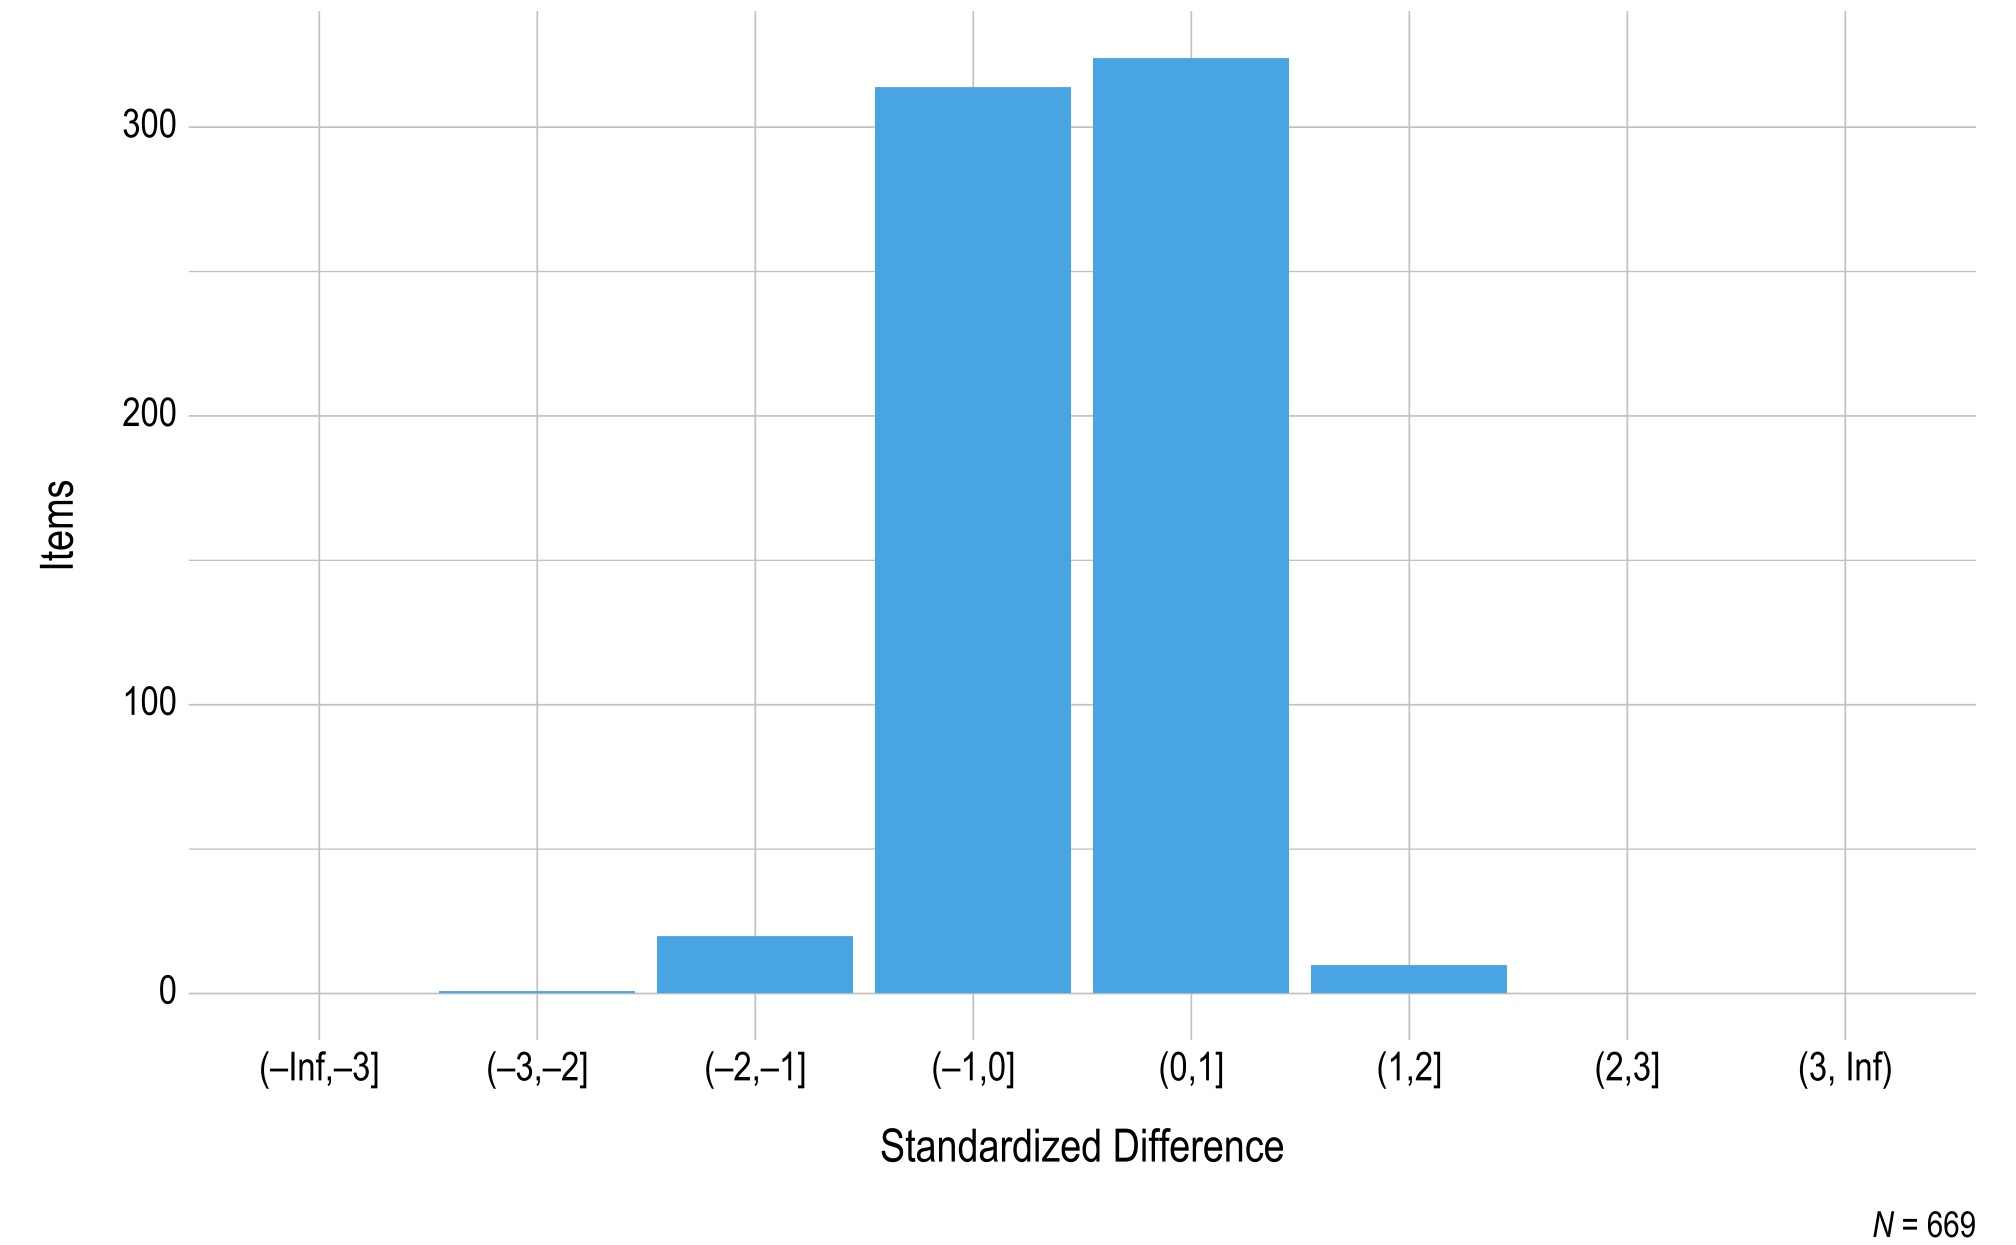 This figure contains a histogram displaying standardized difference on the x-axis and the number of science operational items on the y-axis.